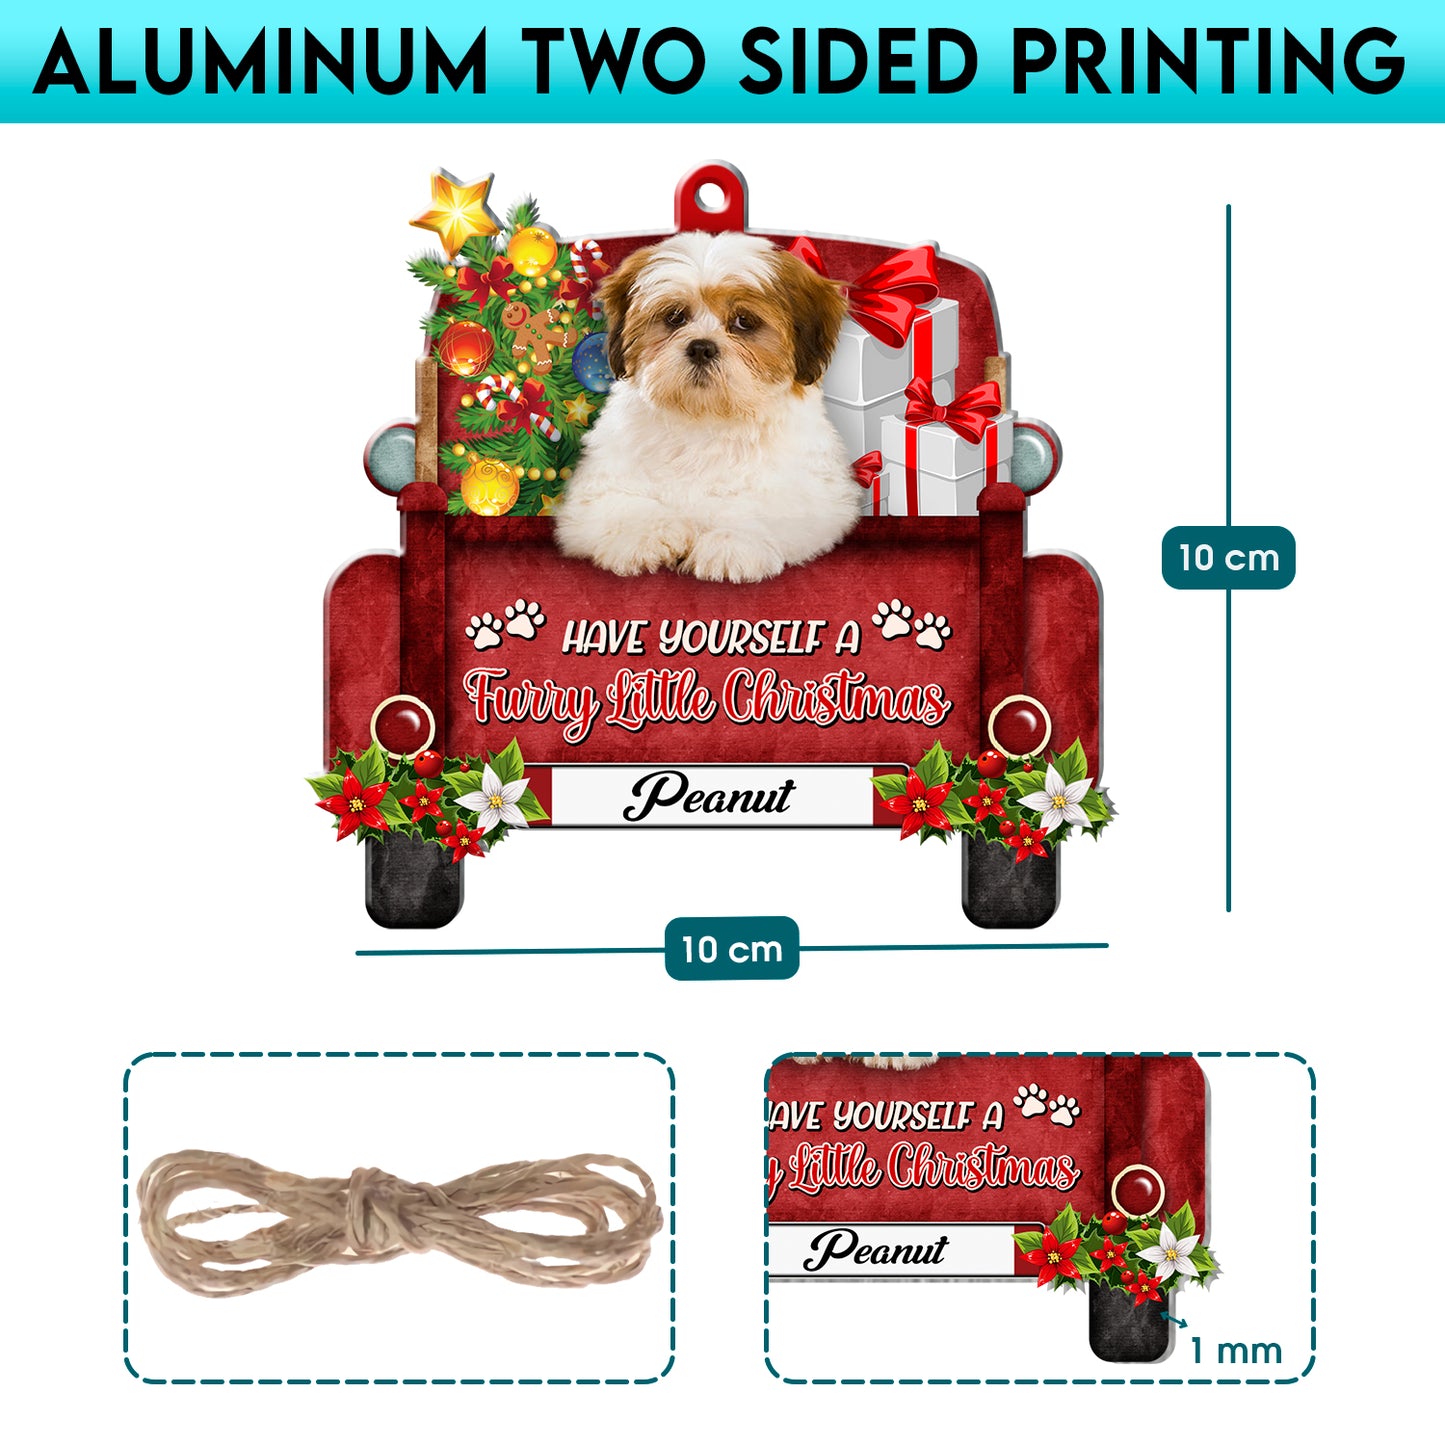 Personalized Lhasa Apso Red Truck Christmas Aluminum Ornament